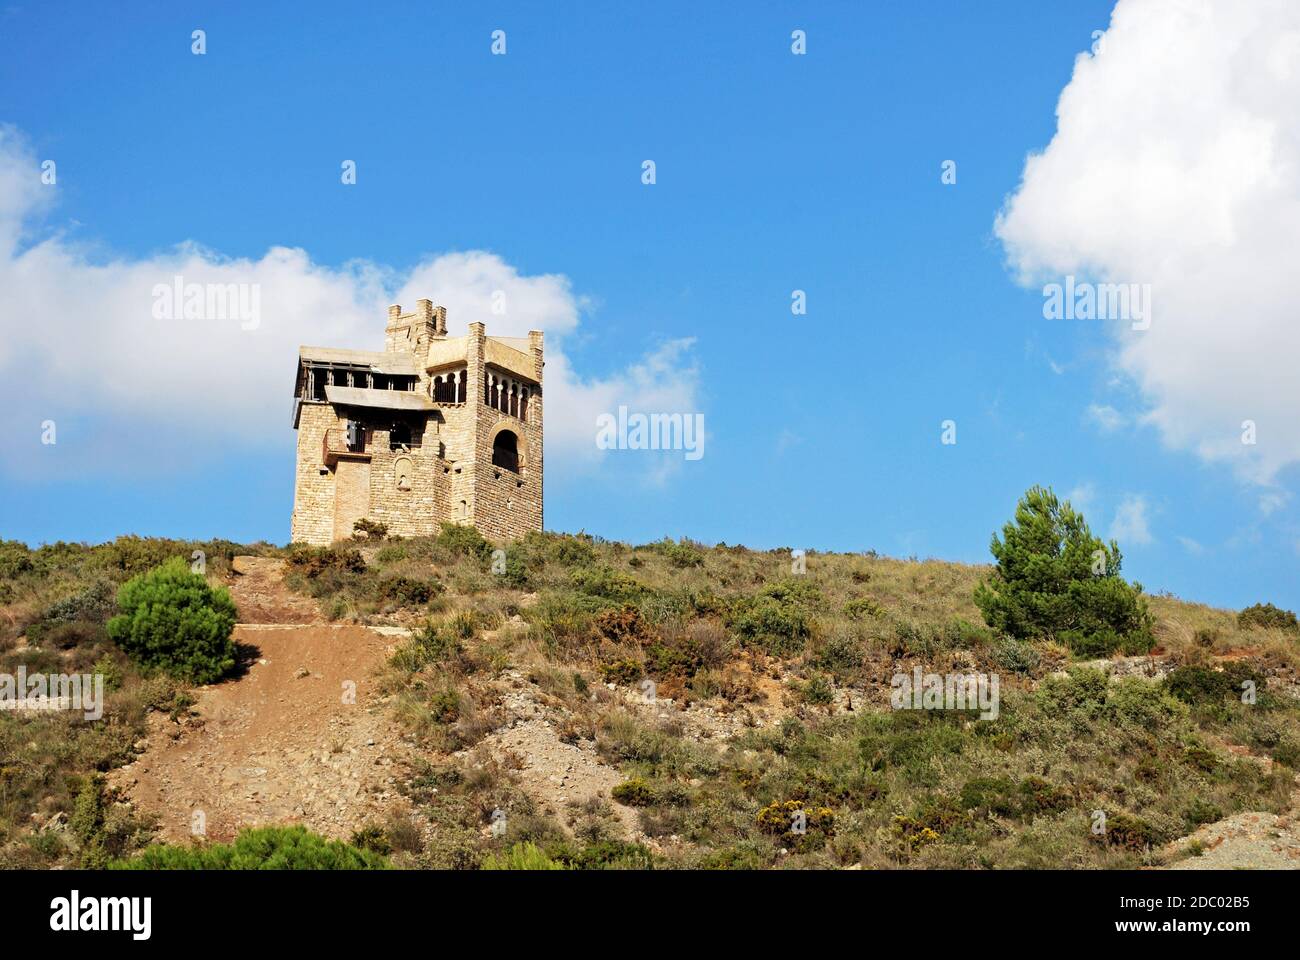 Folly in the countryside originally built as a water tower, Alhaurin El Grande, Costa del Sol, Andalusia, Spain, Europe. Stock Photo